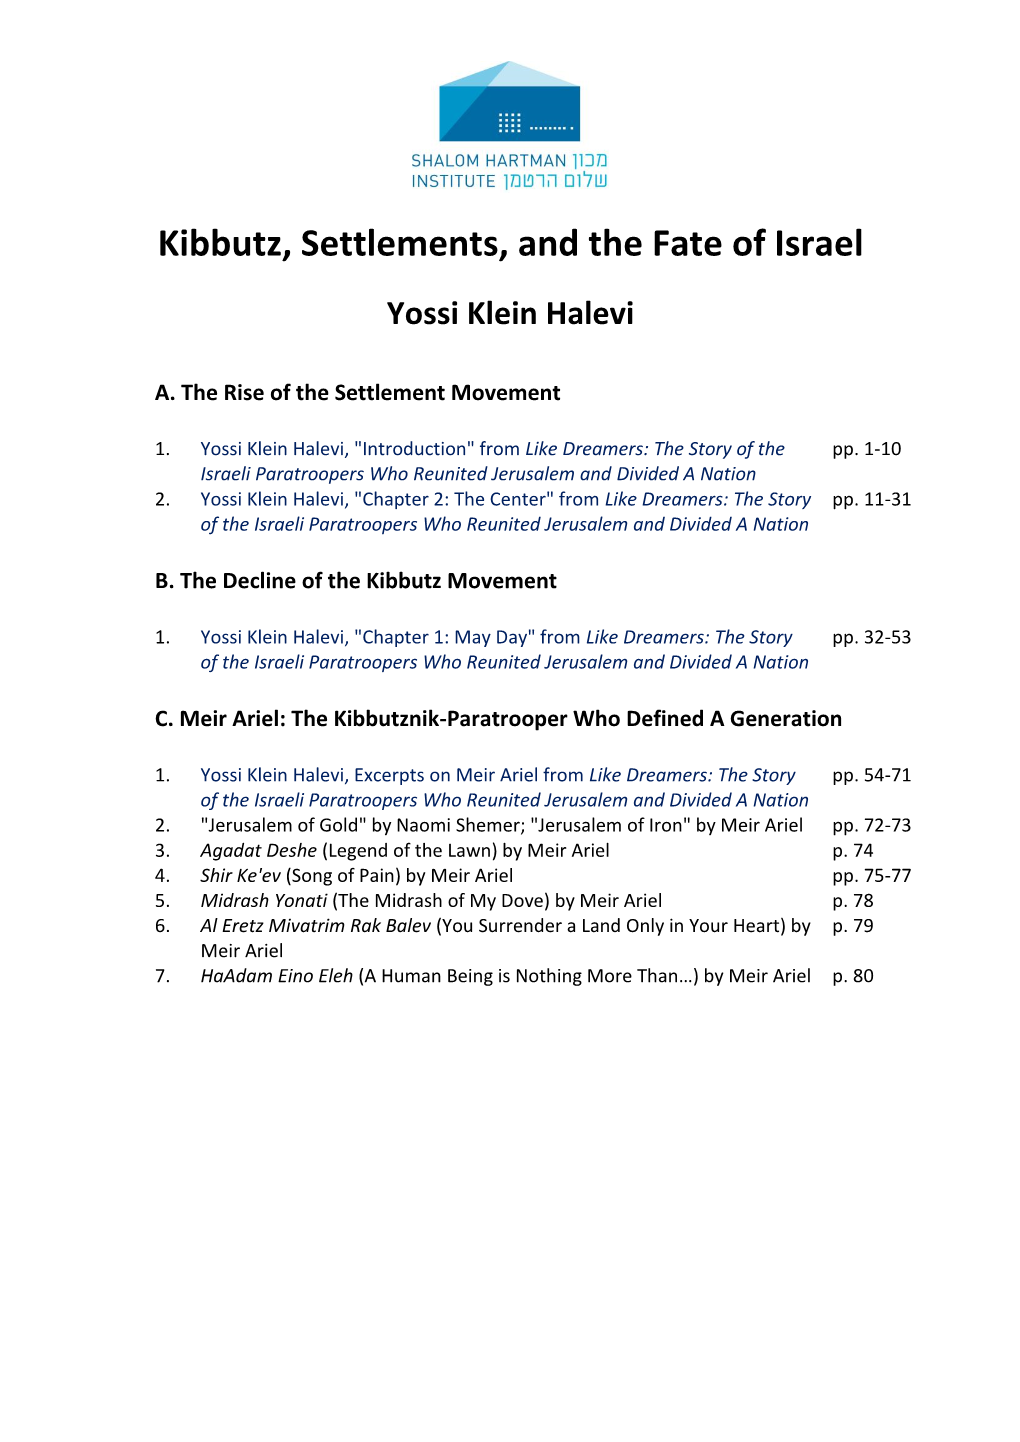 Kibbutz, Settlements, and the Fate of Israel